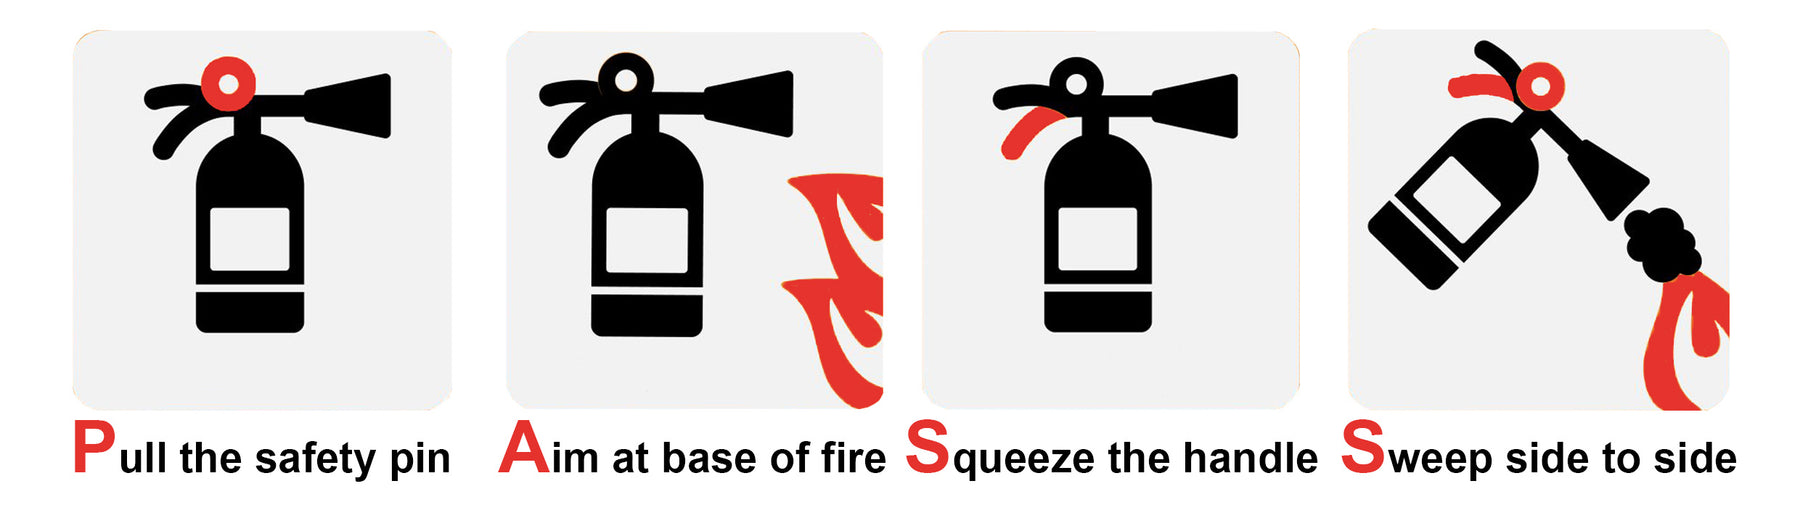 How To Use A Fire Extinguisher